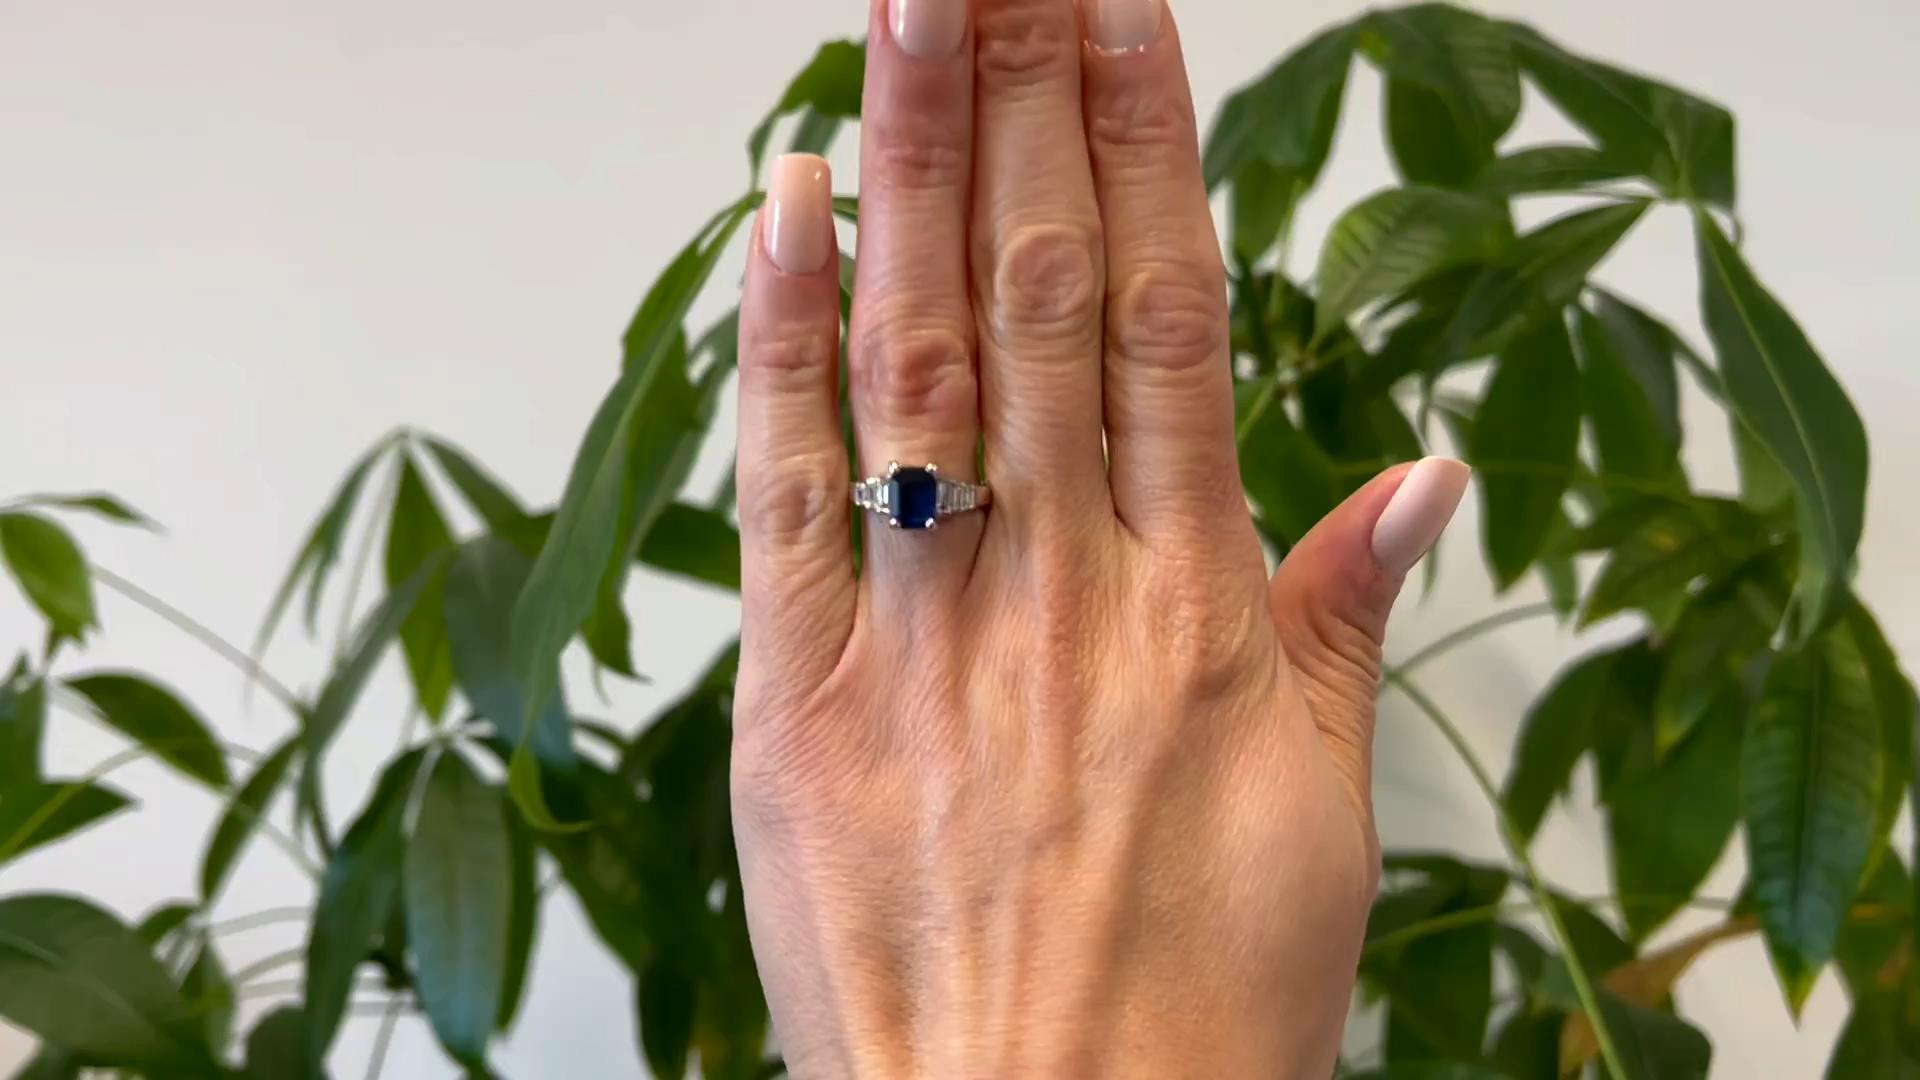 One Vintage GIA Thai Sapphire and Diamond 18k White Gold. Featuring one GIA octagonal mixed cut sapphire weighing approximately 1.75 carats, accompanied with GIA #2239102566 stating the sapphire is of Thai origin. Accented by six baguette cut